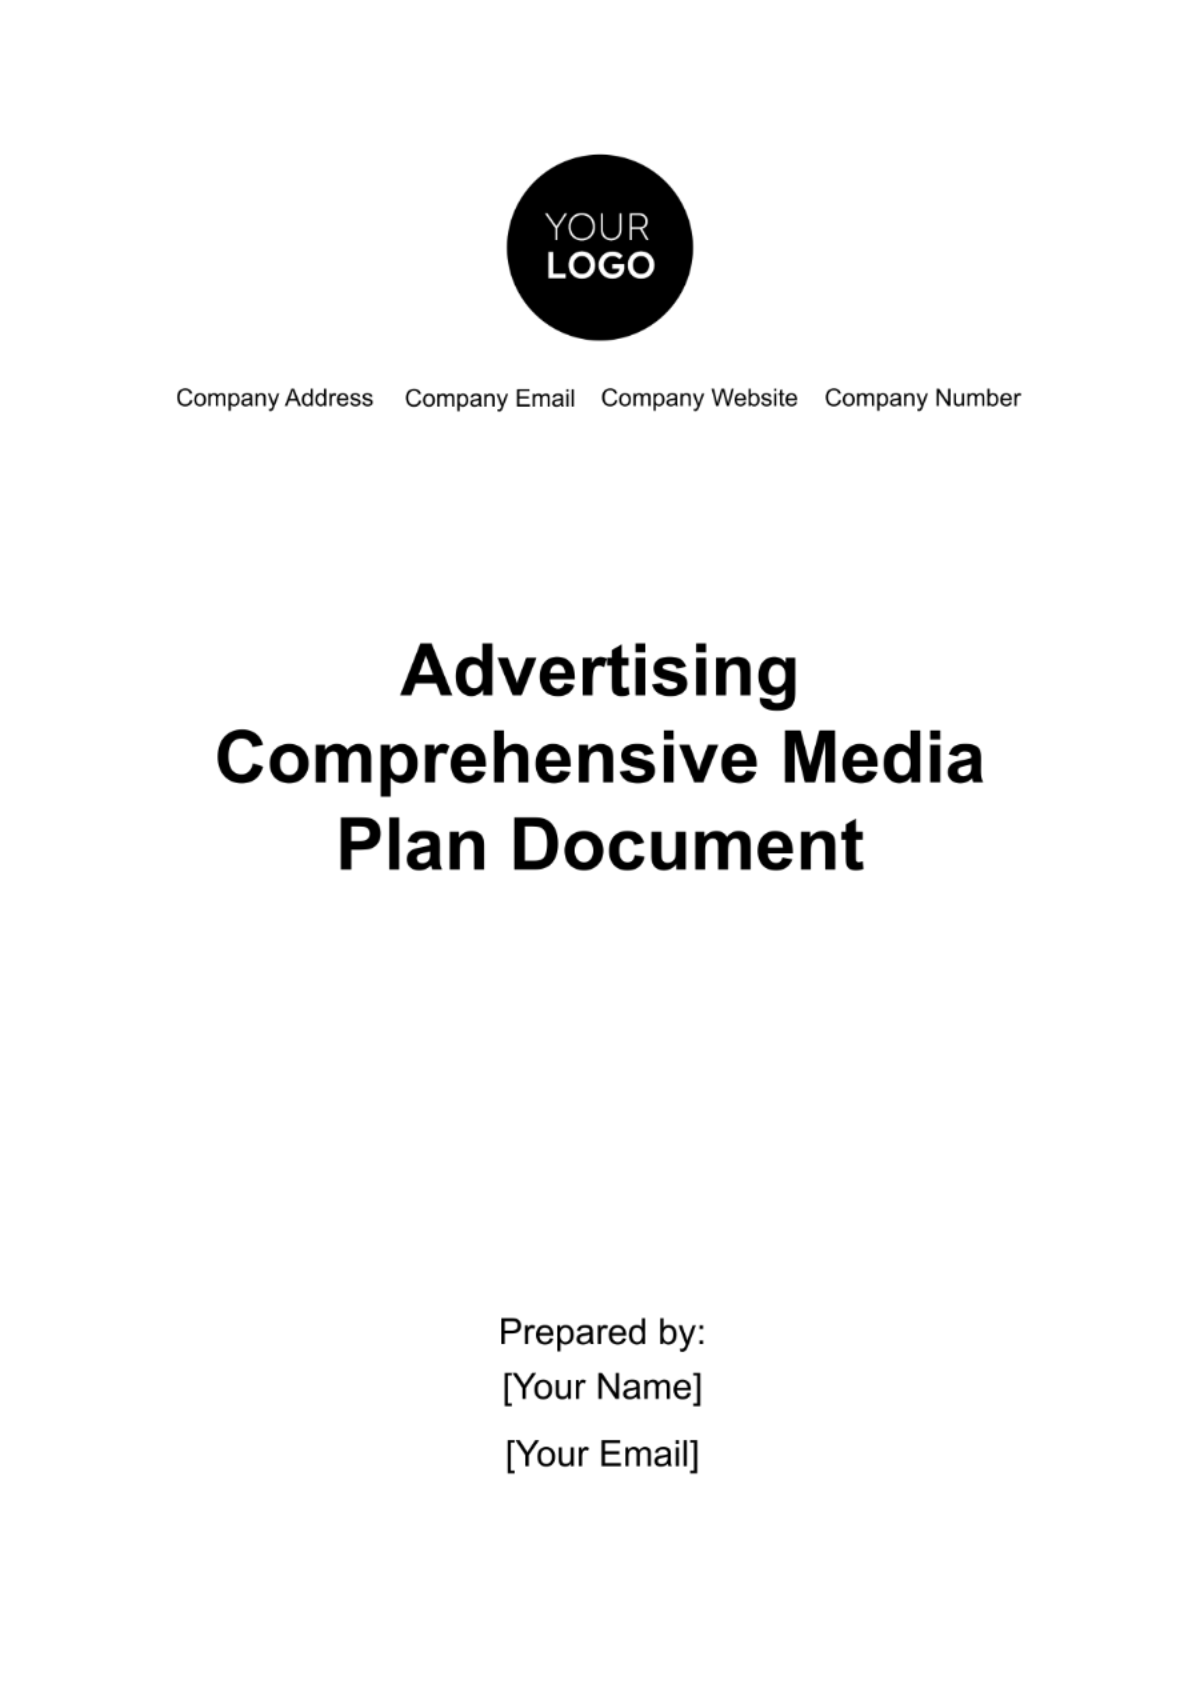 Free Advertising Comprehensive Media Plan Document Template